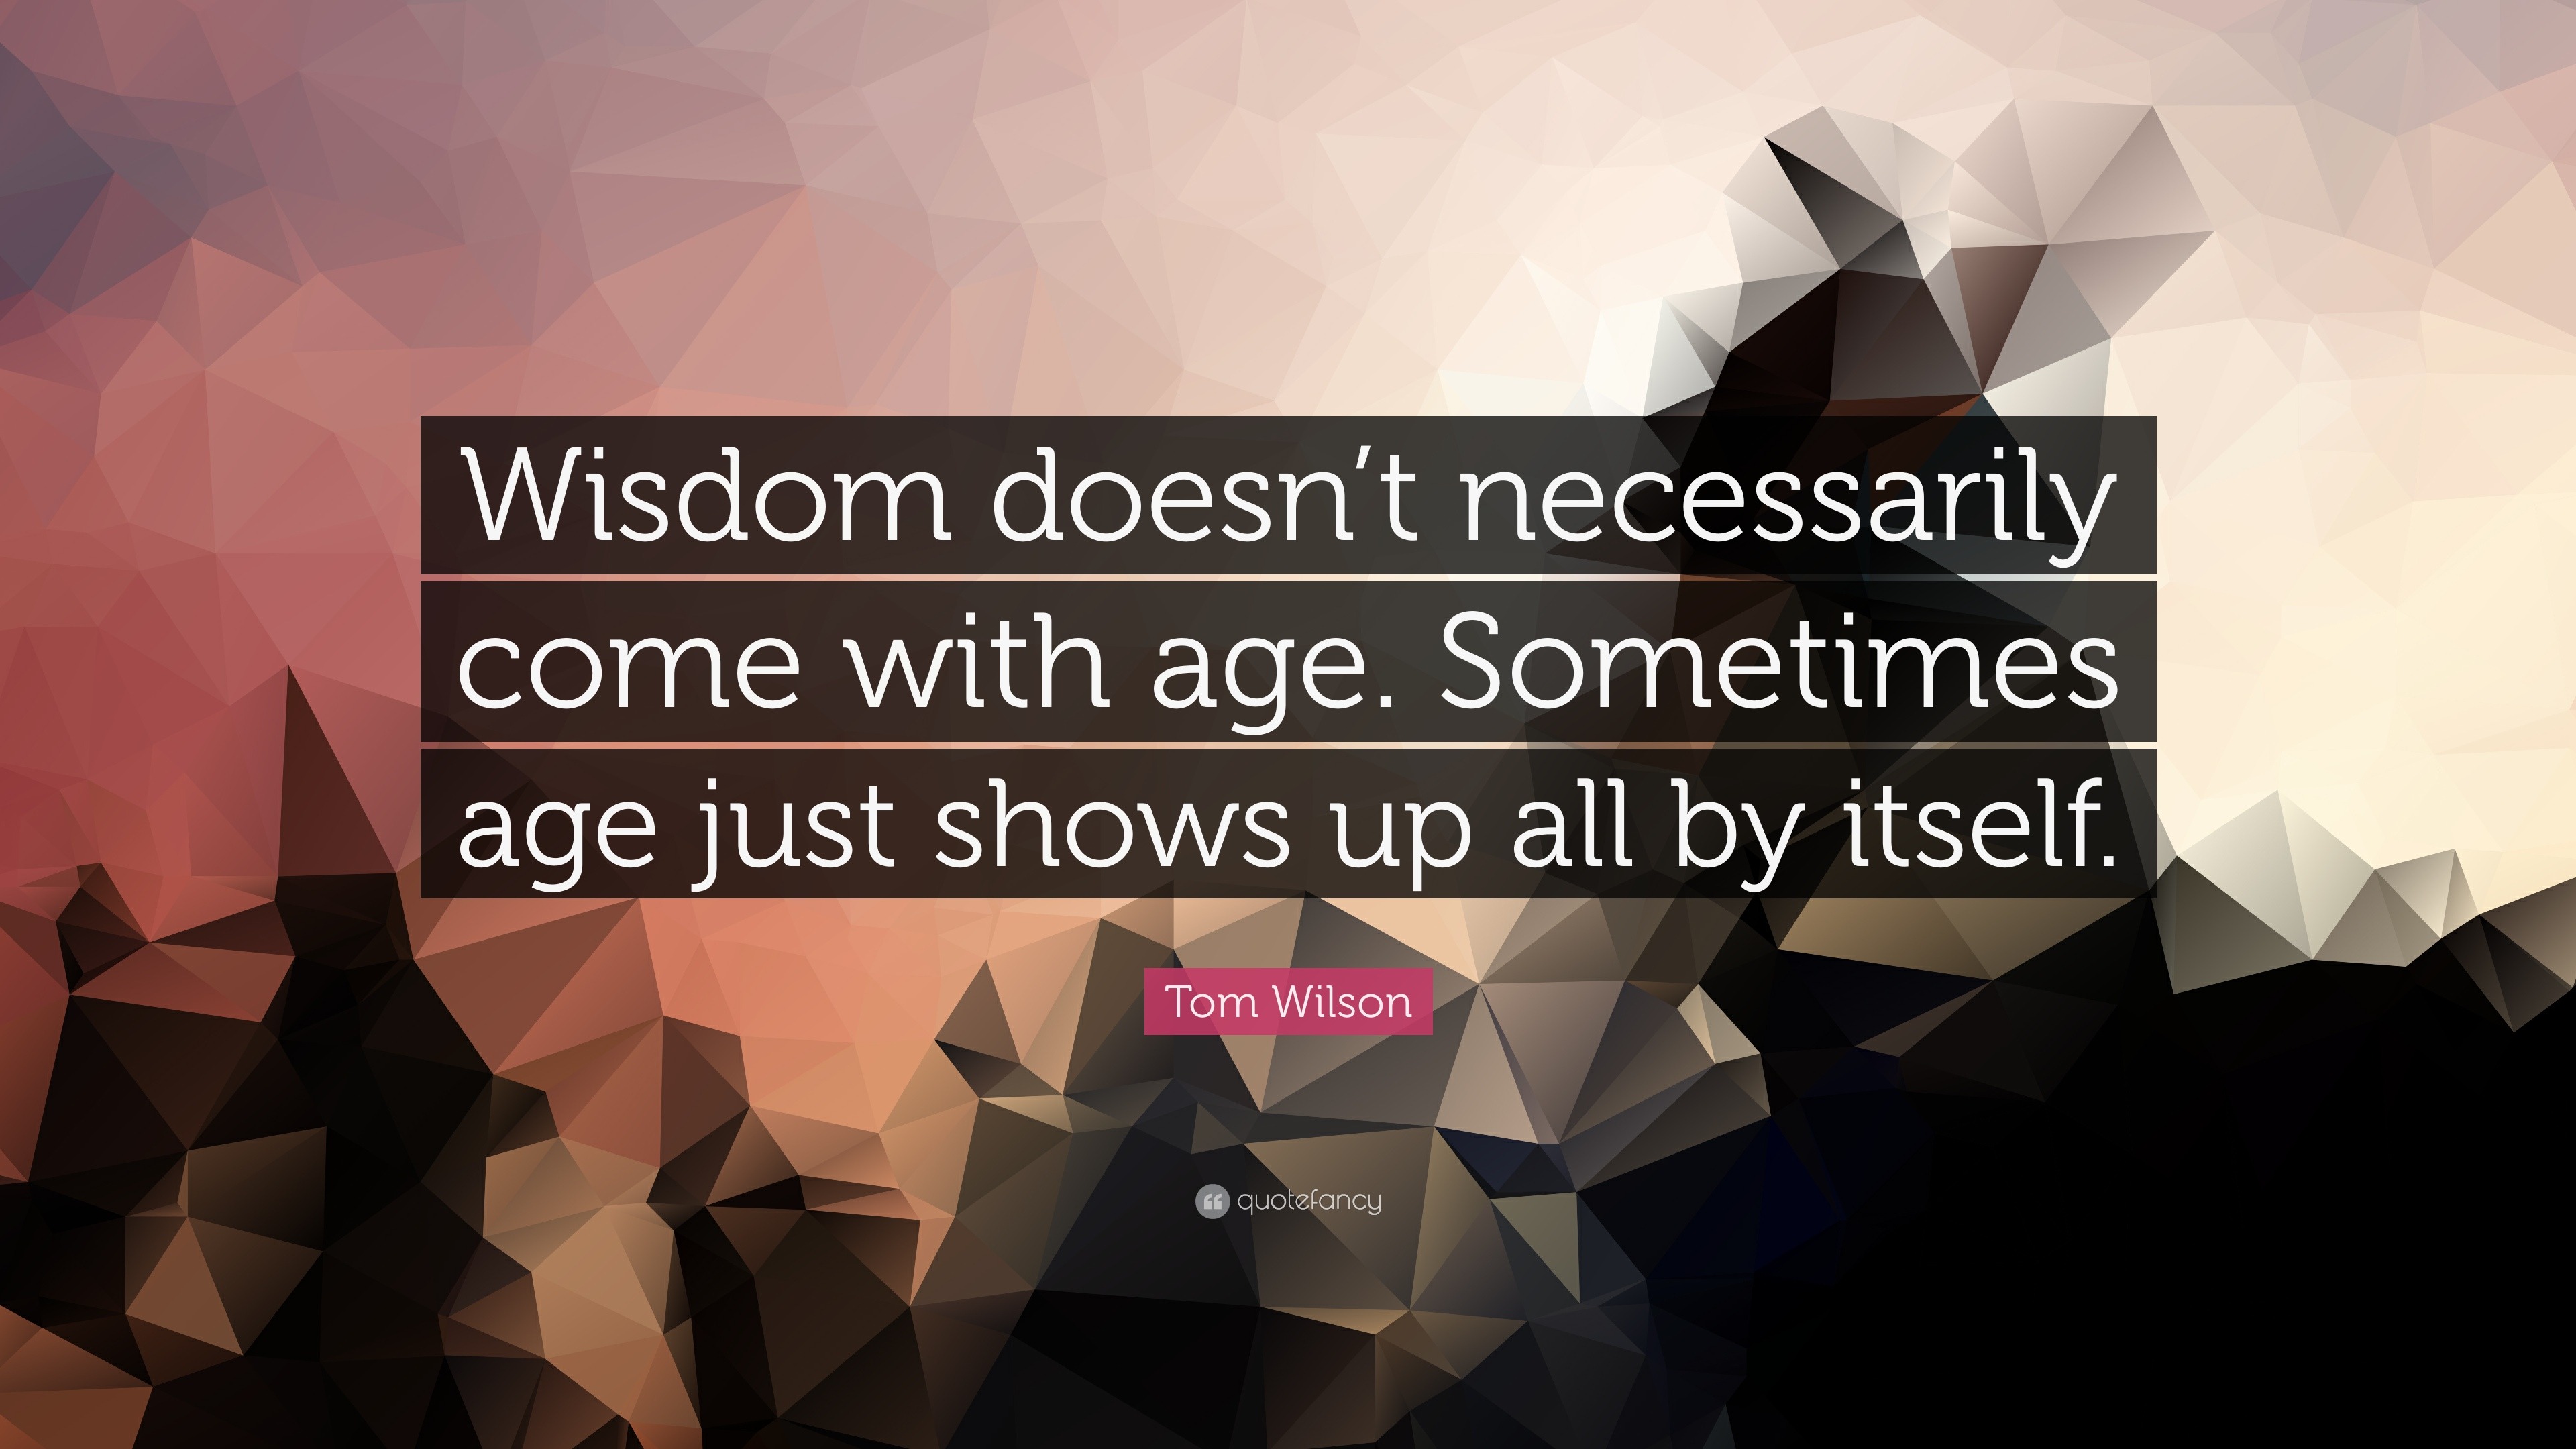 Essay on wisdom doesn come with age